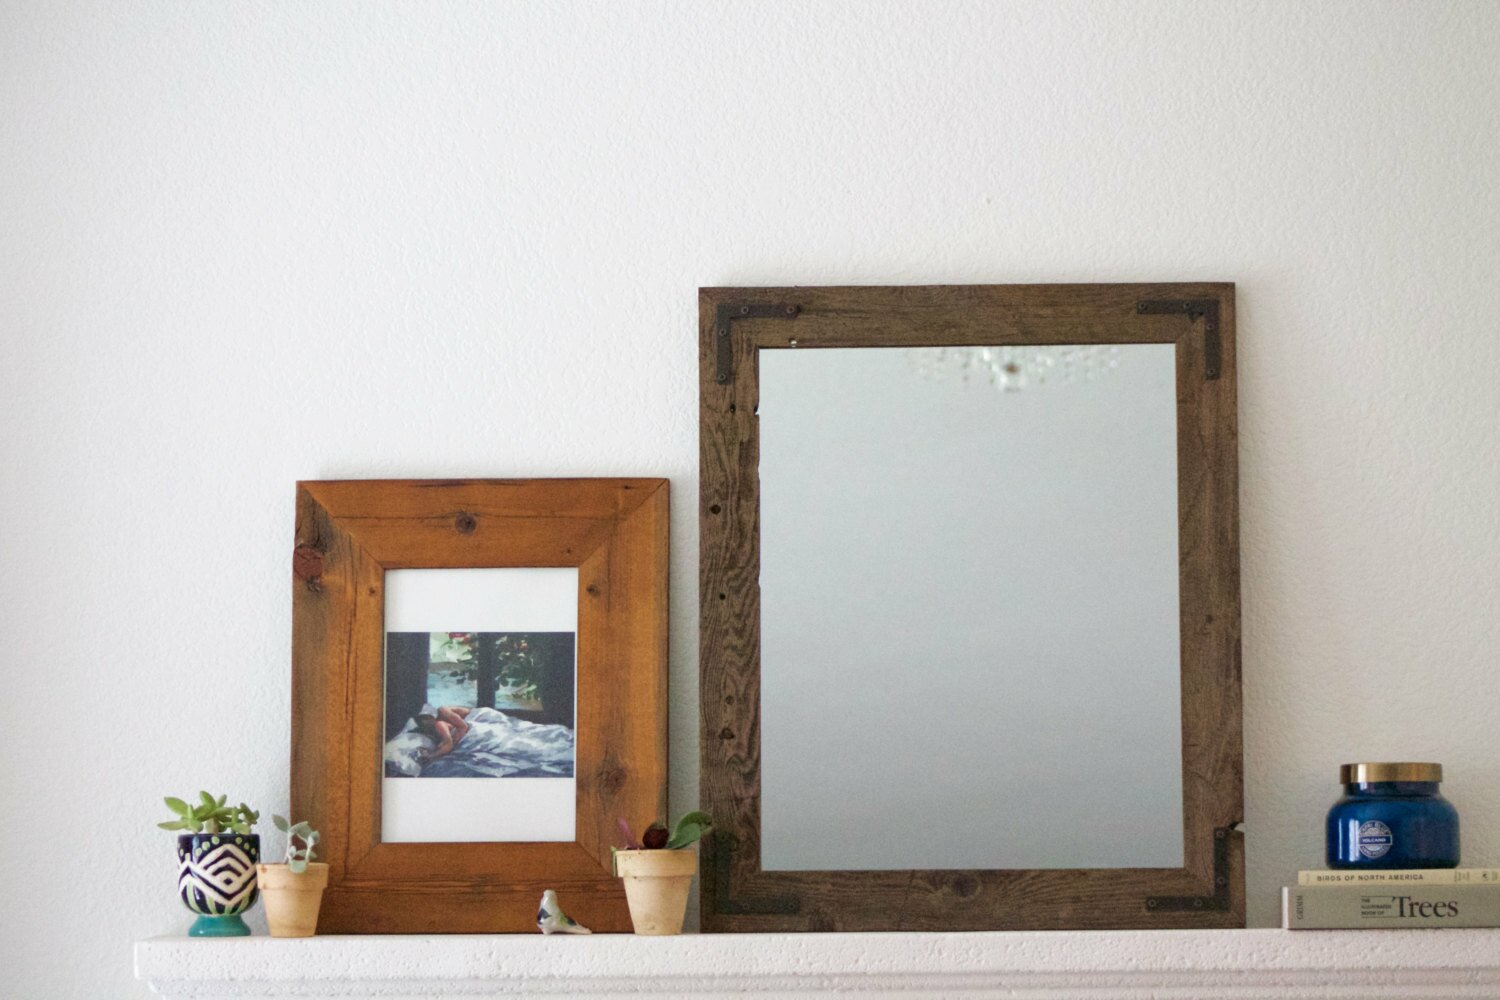 Rustic Style Vanity Ideas with Reclaimed Wood Mirror: Reclaimed Wood Mirror | Sun Mirror Wall Decor | Wall Mirror Target